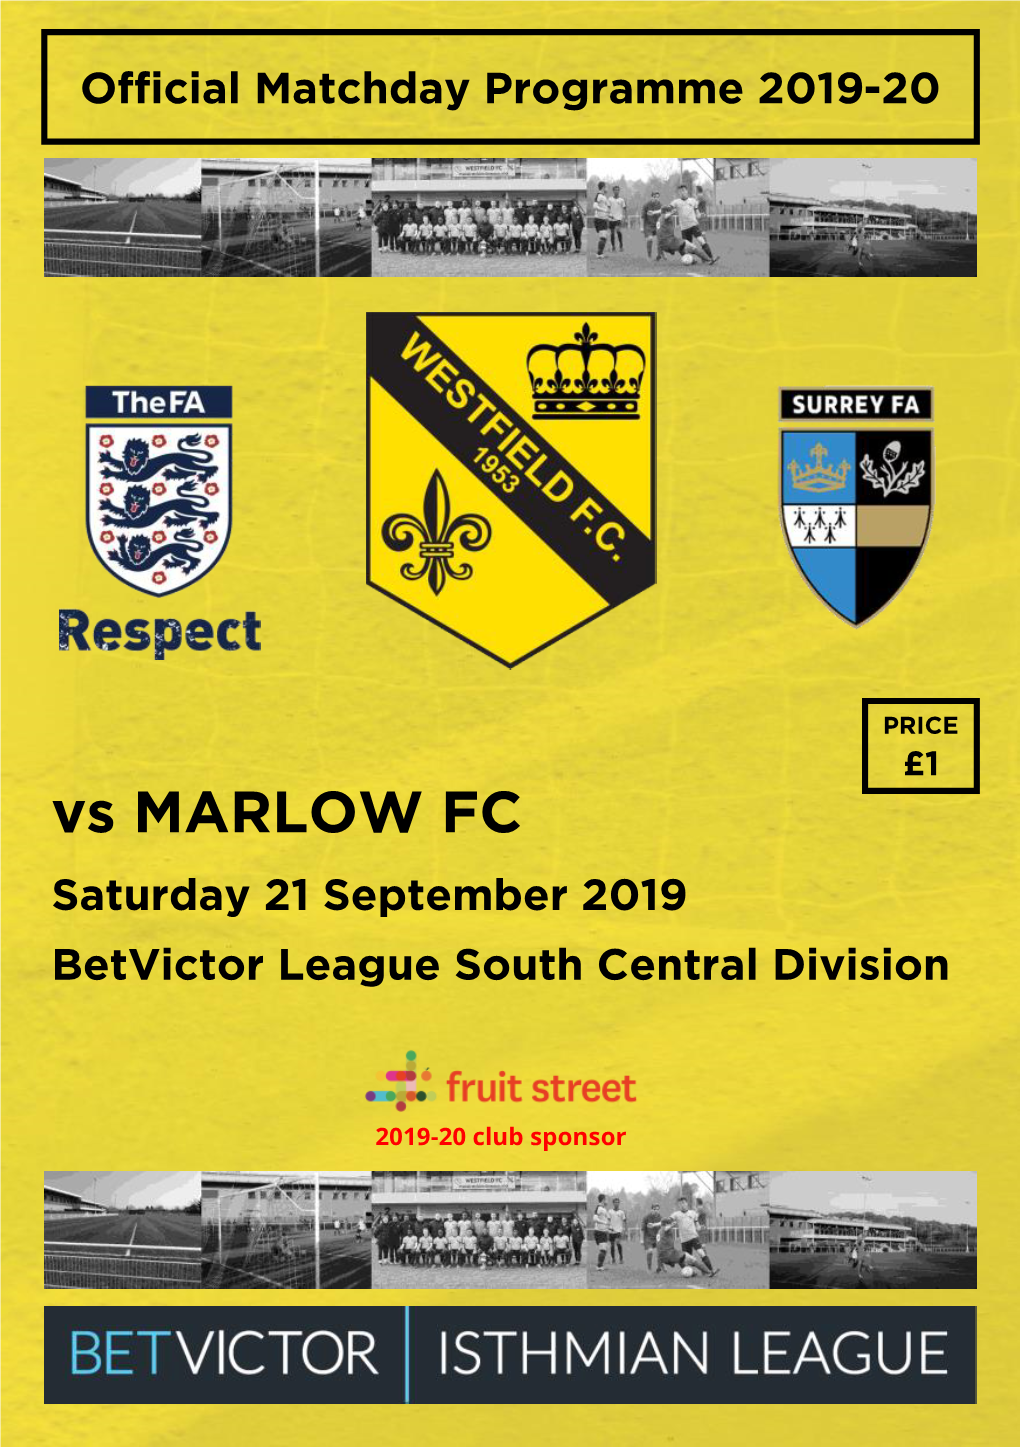 Vs MARLOW FC Saturday 21 September 2019 Betvictor League South Central Division